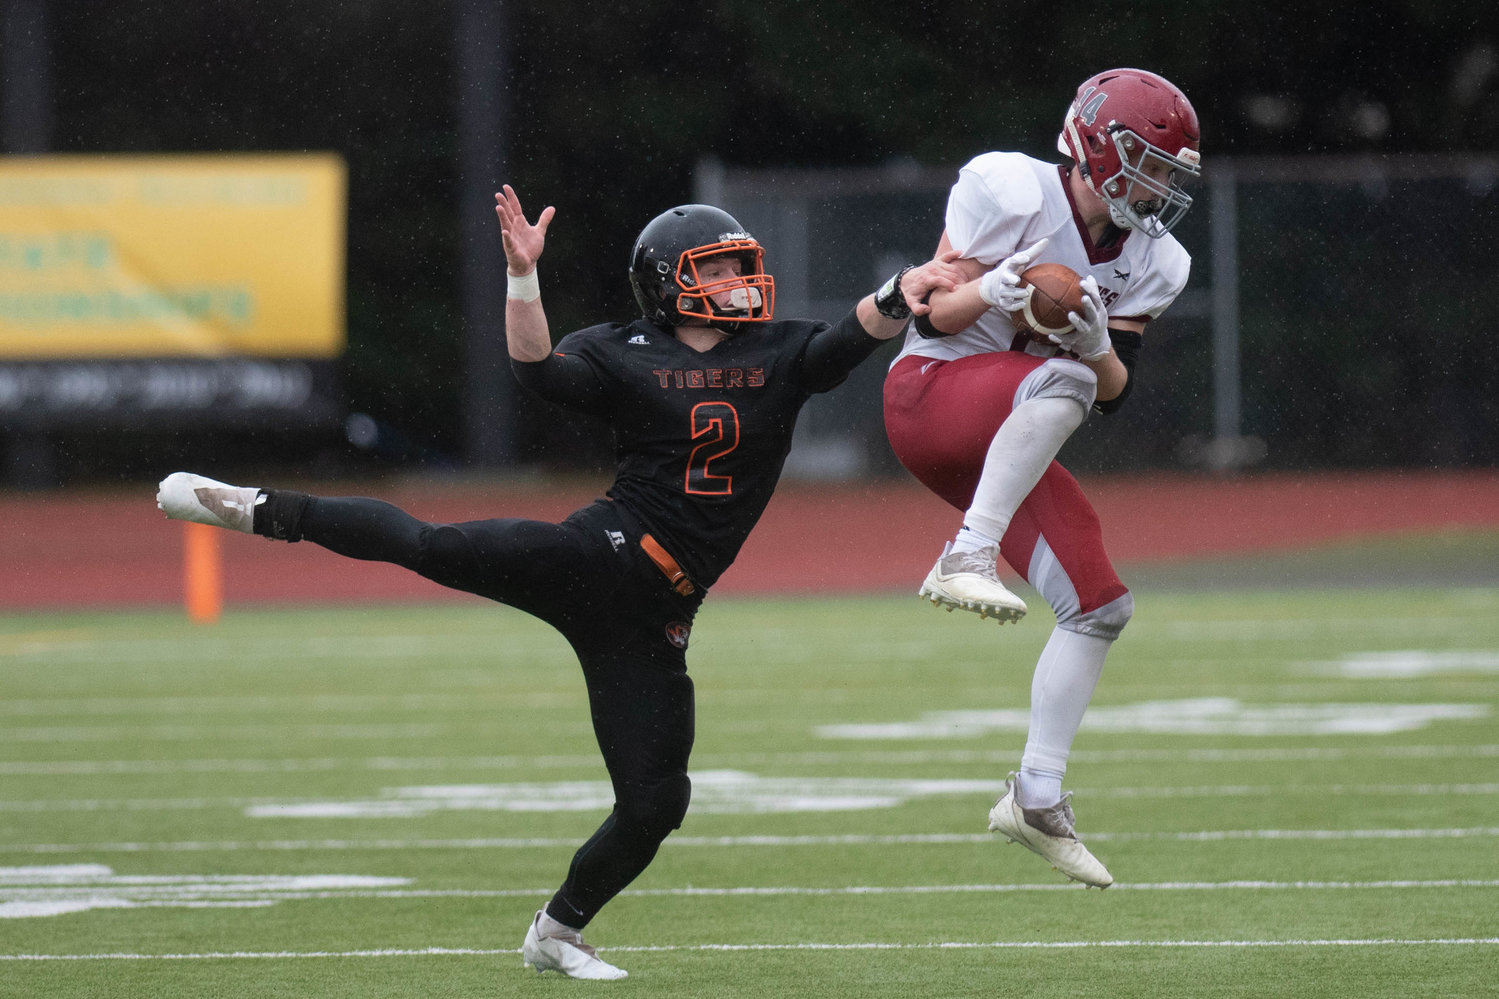 Napavine's Cael Stanley tries to take down an Okanogan receiver in the 2B state semifinals at Tumwater Nov. 27.